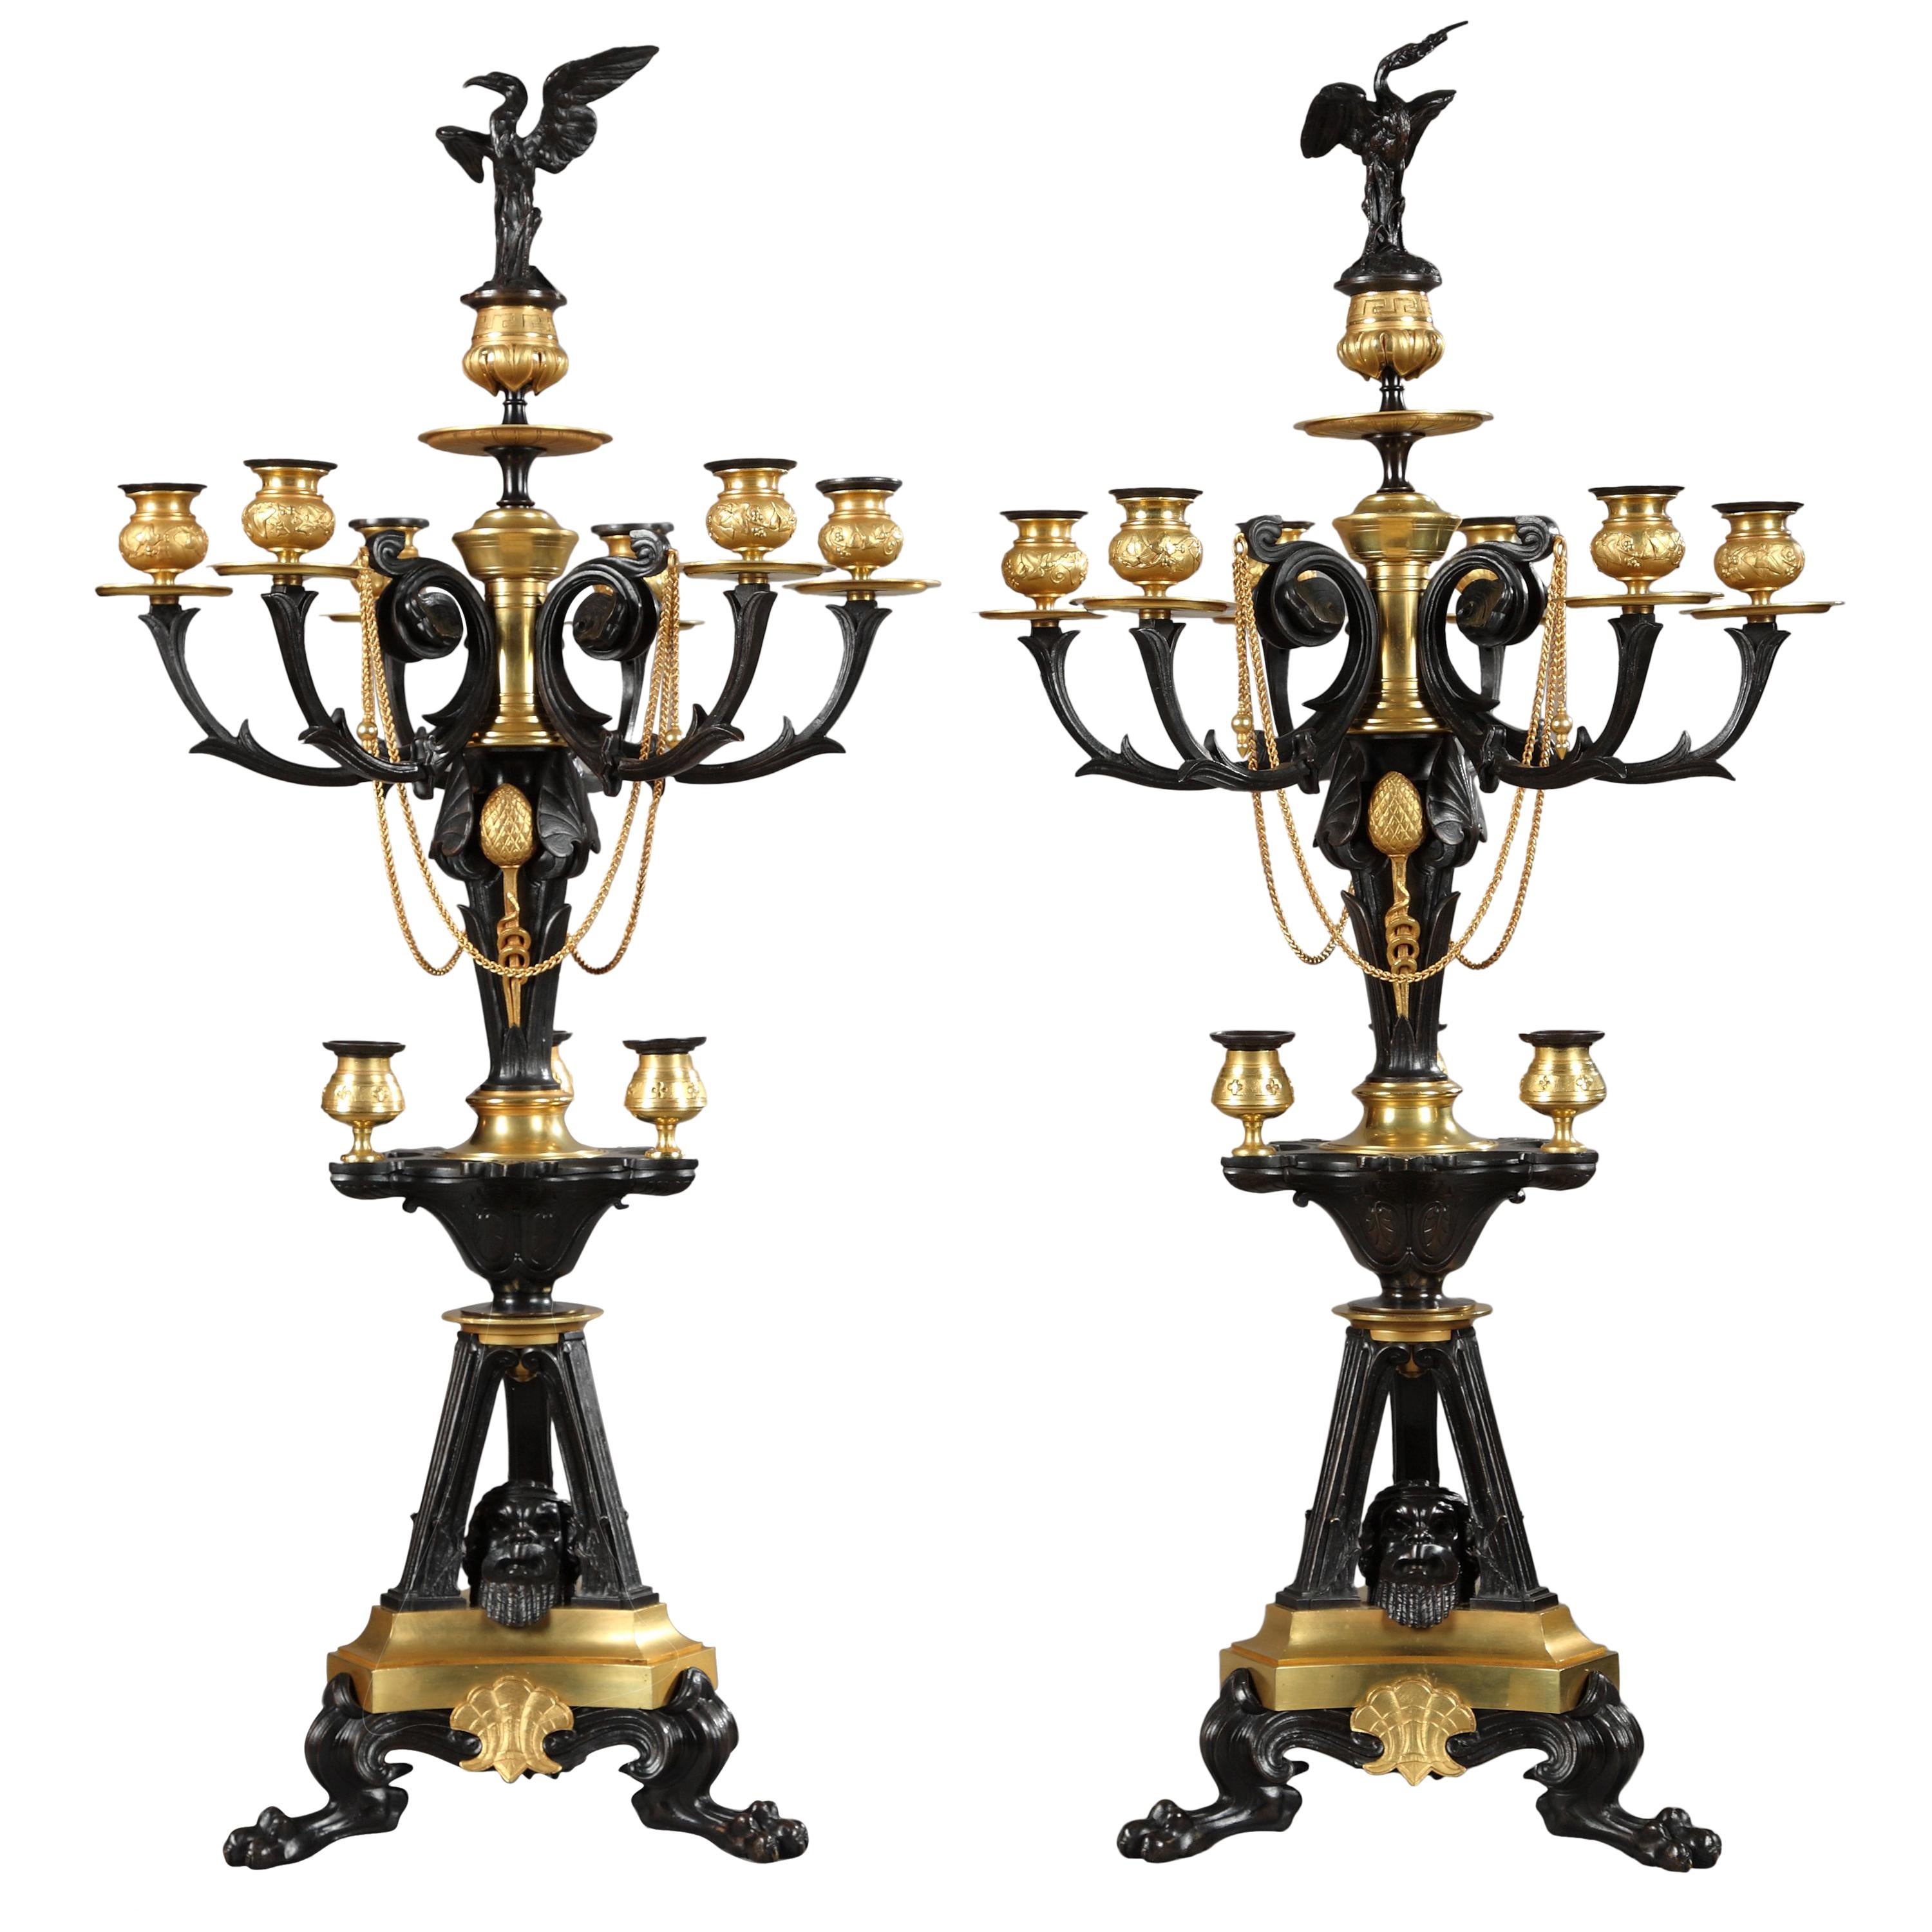 Pair of Neo-Greek Bronze Candelabras Attributed to G.Servant, France, Circa 1870 For Sale